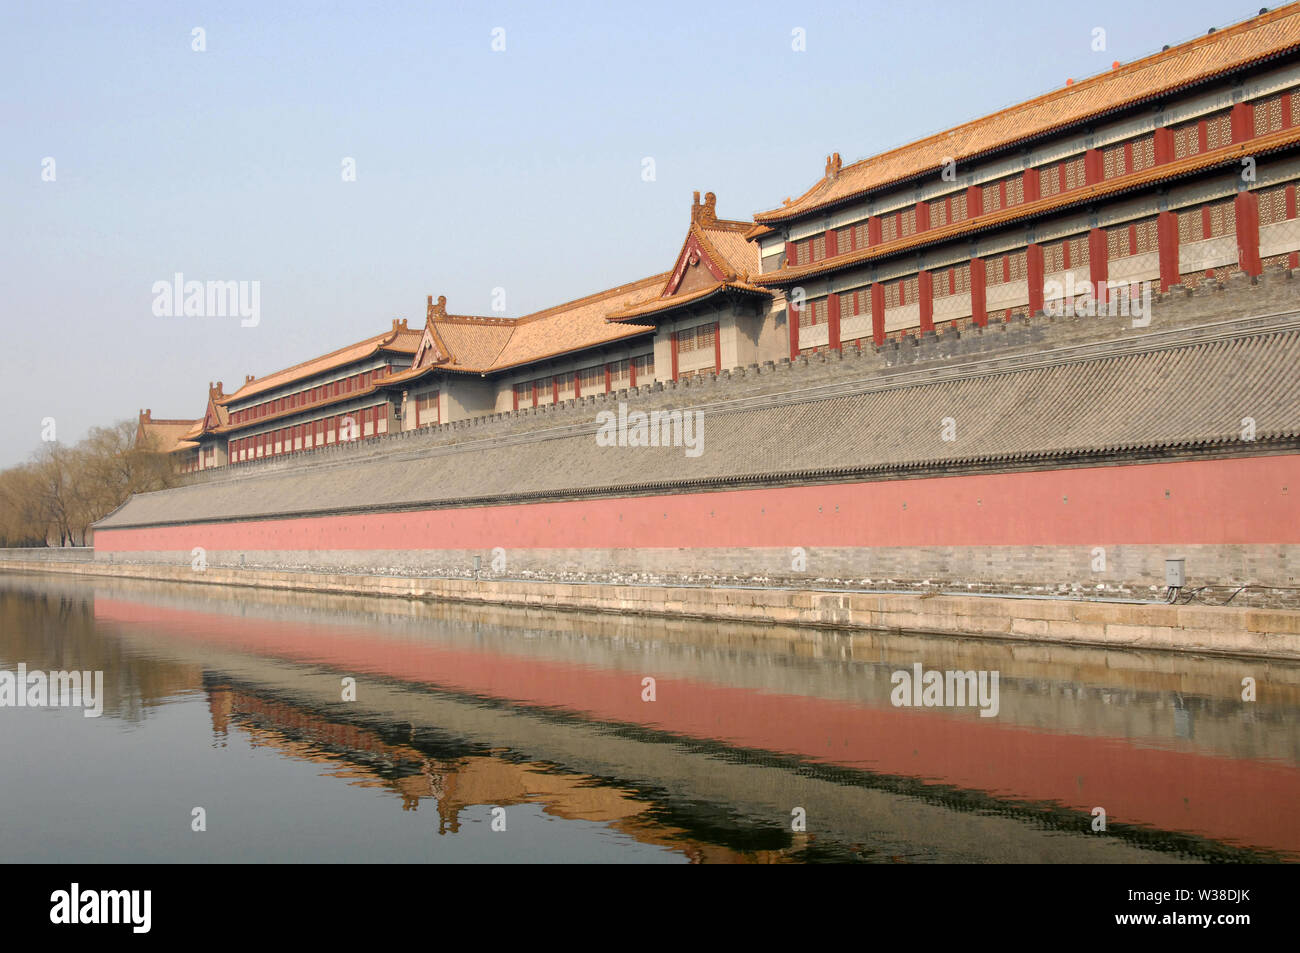 Forbidden City, Beijing, China. Walls and moat seen from outside the Forbidden City. The Forbidden City has traditional Chinese architecture. UNESCO. Stock Photo